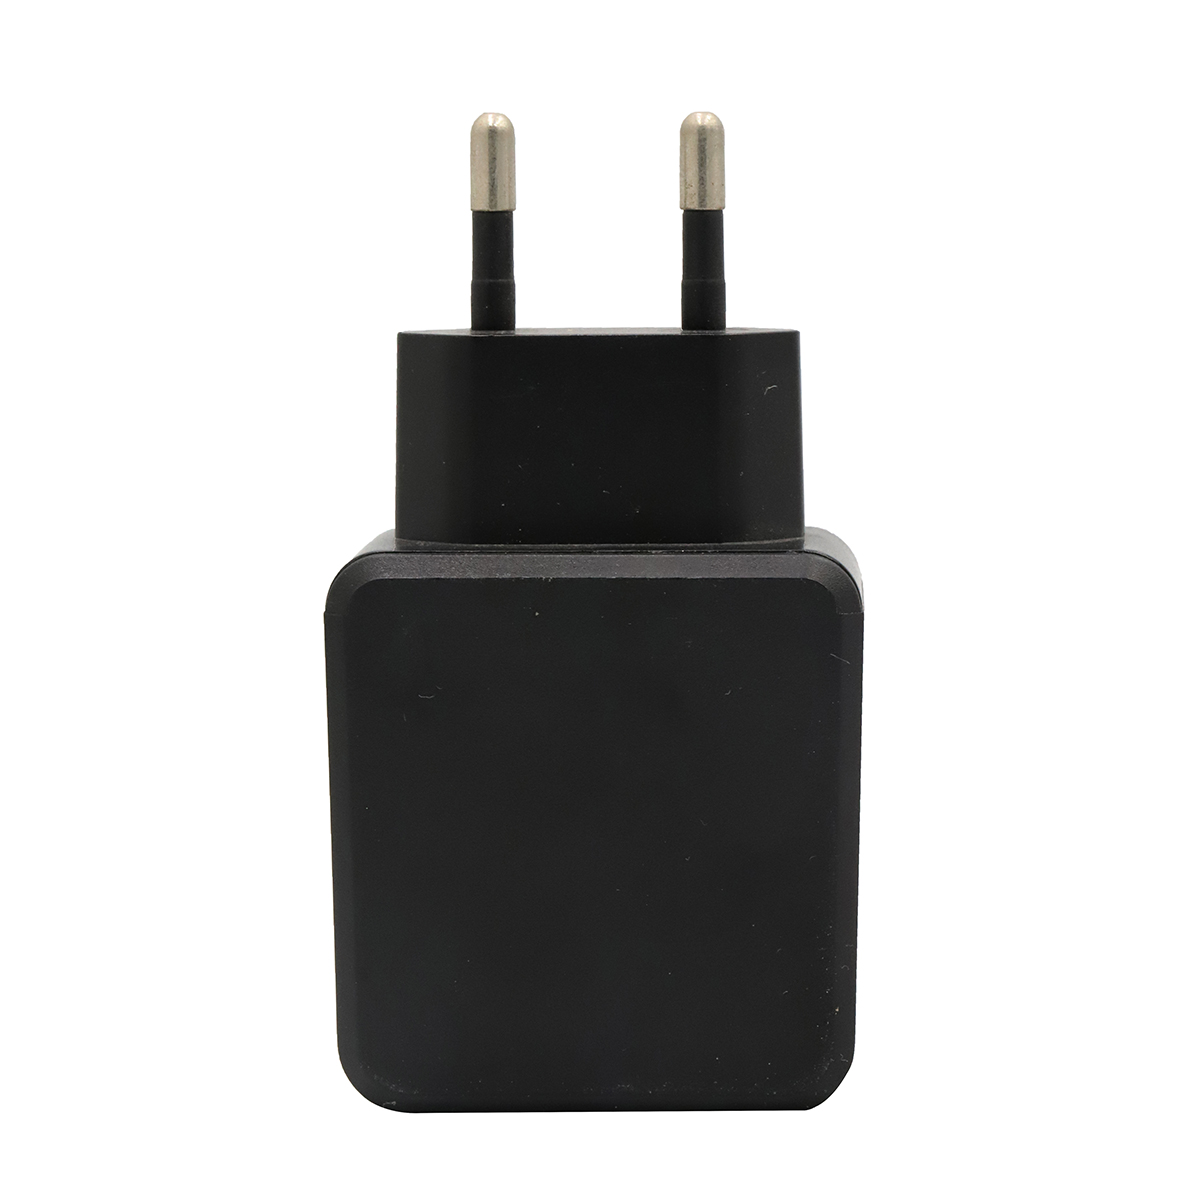 4. LM-3400 Dual USB Wall Charger Bulk Purchase and Corporate purchase from China Union Power -Description-